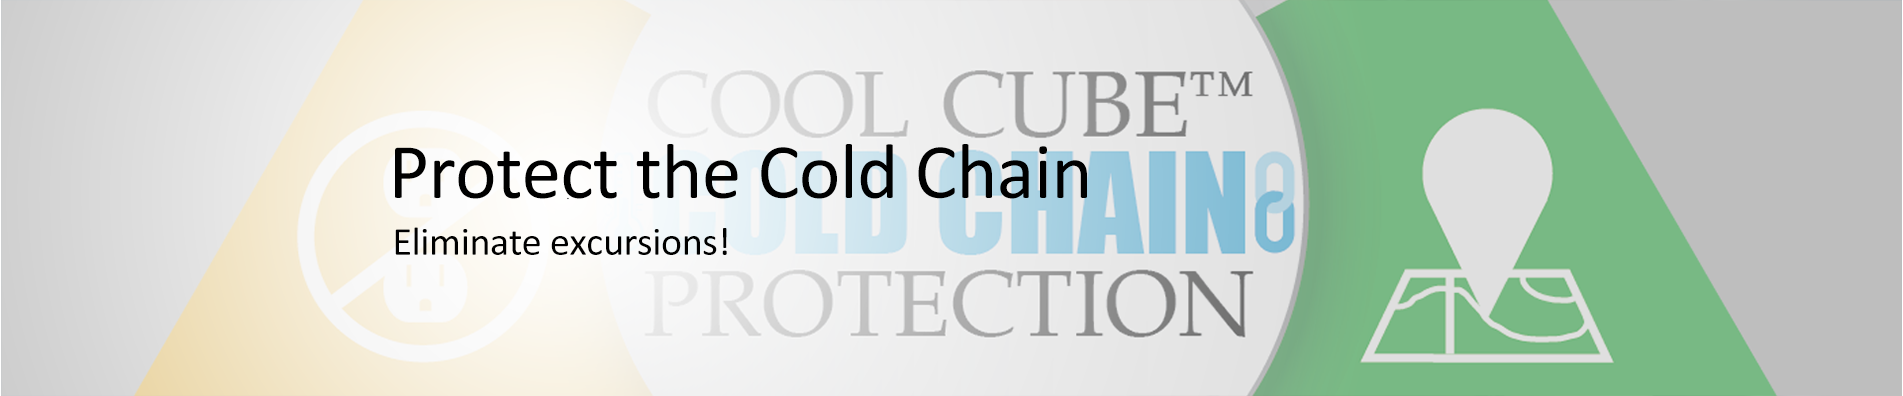 Protect the Cold Chain header